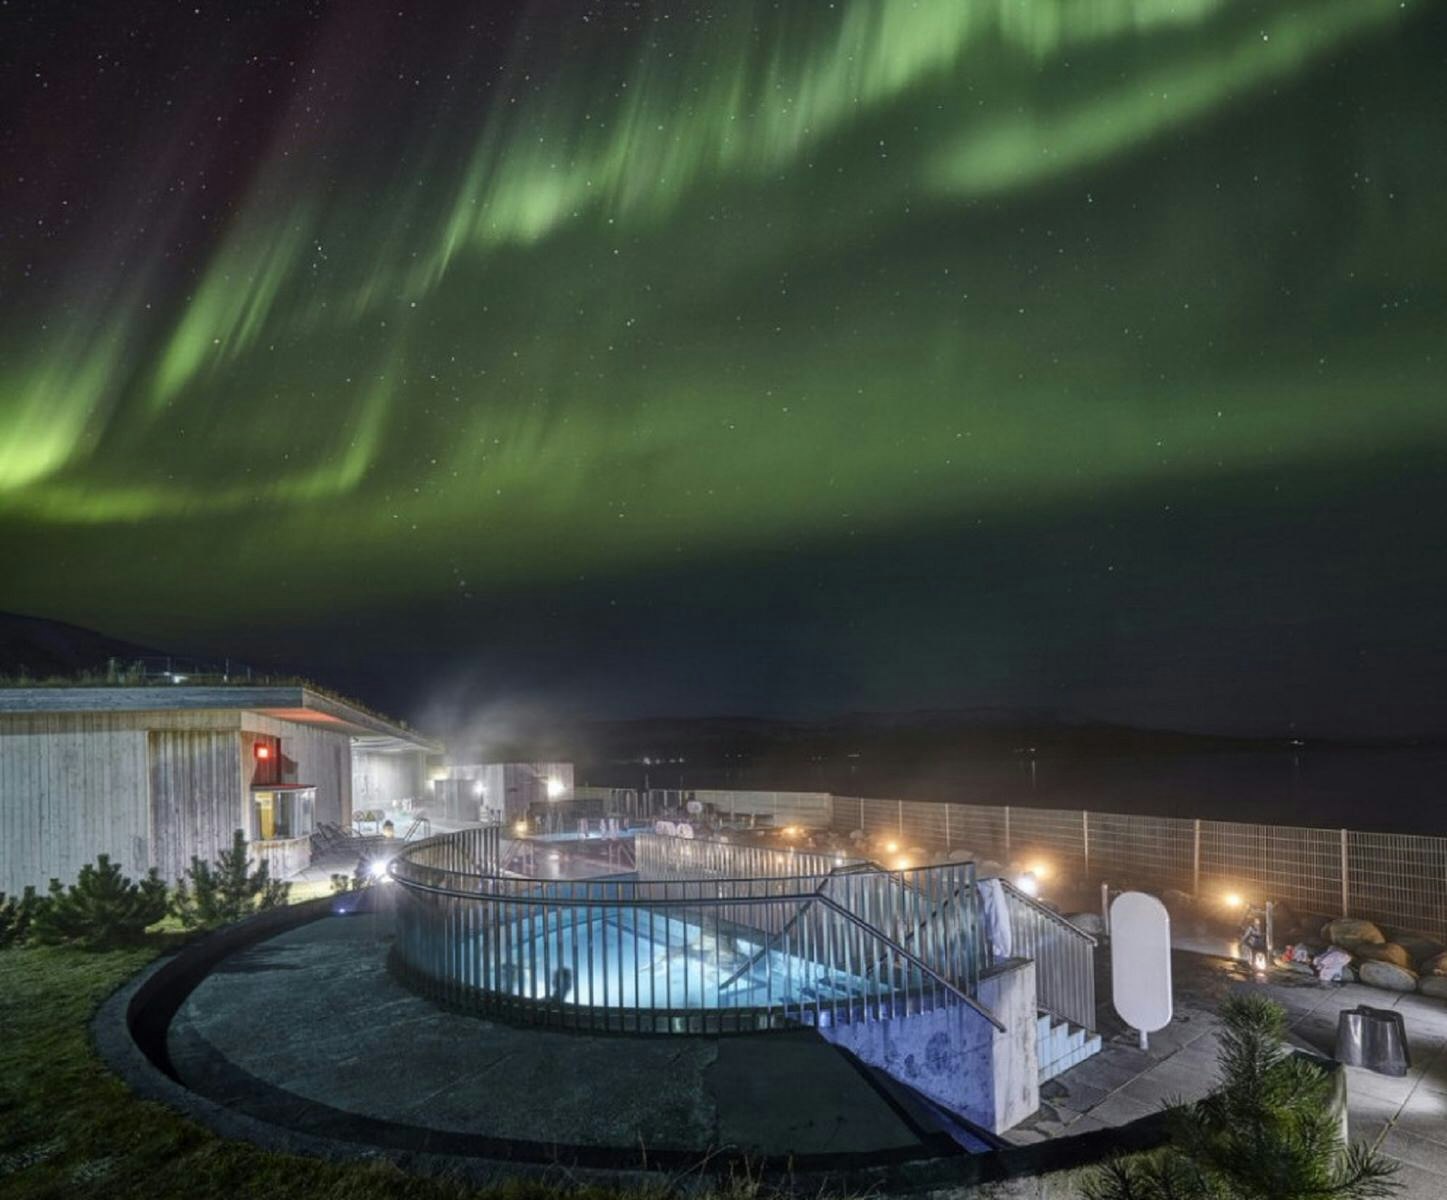 The outdoor pool at Laugarvatn Fontana with the aurora borealis visible overhead